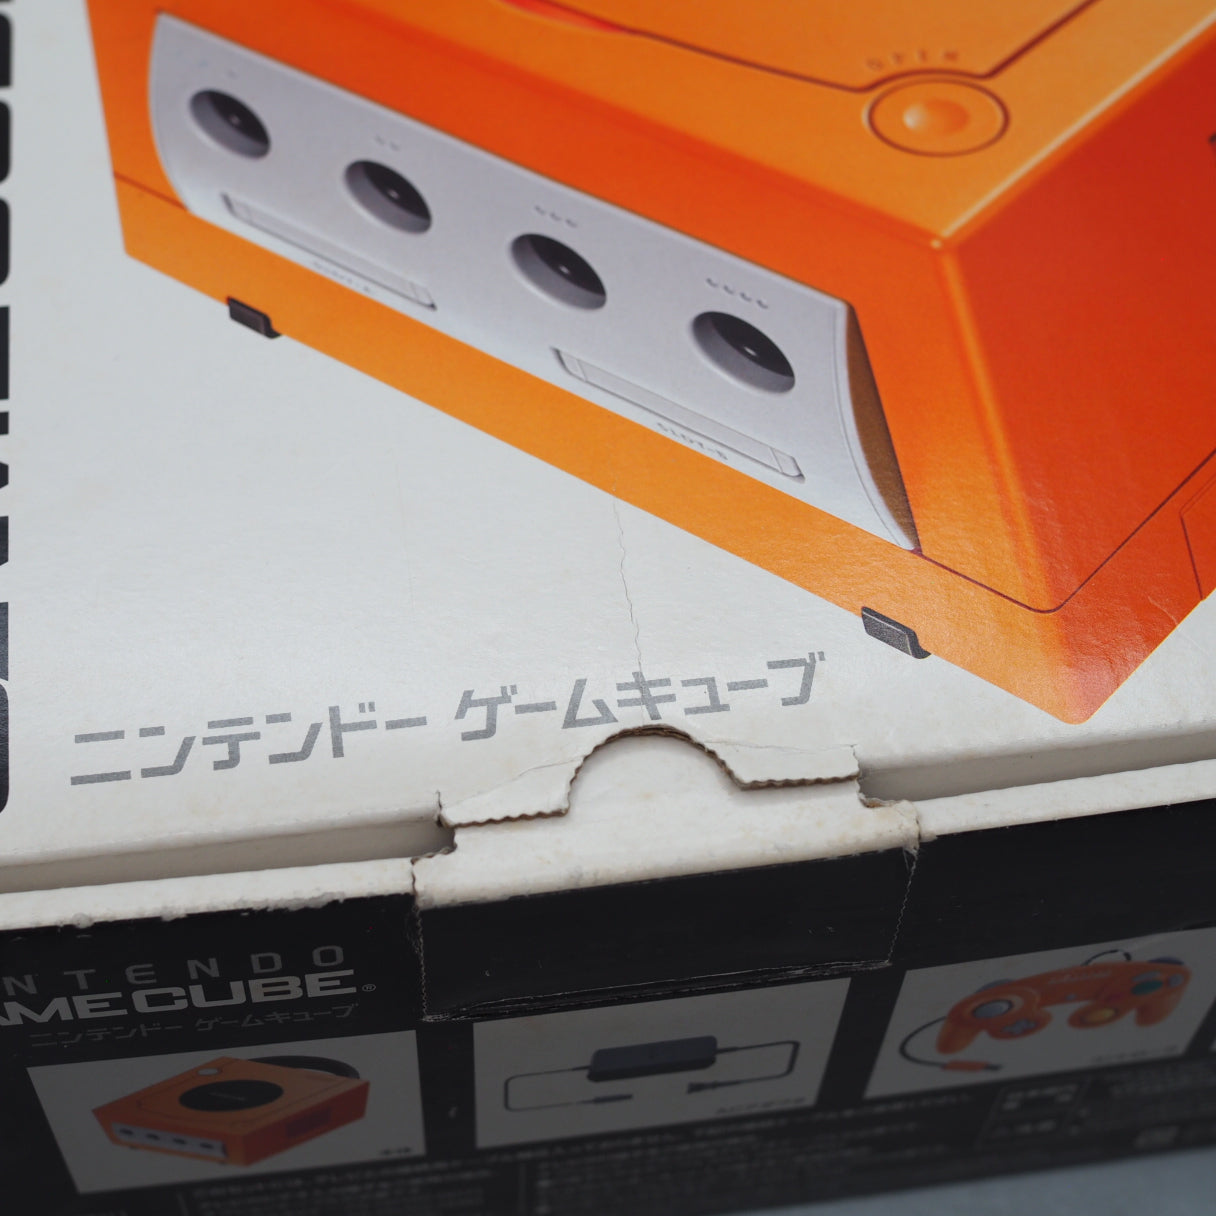 Nintendo GameCube Console System Orange Boxed DOL-101 [Serial number match]